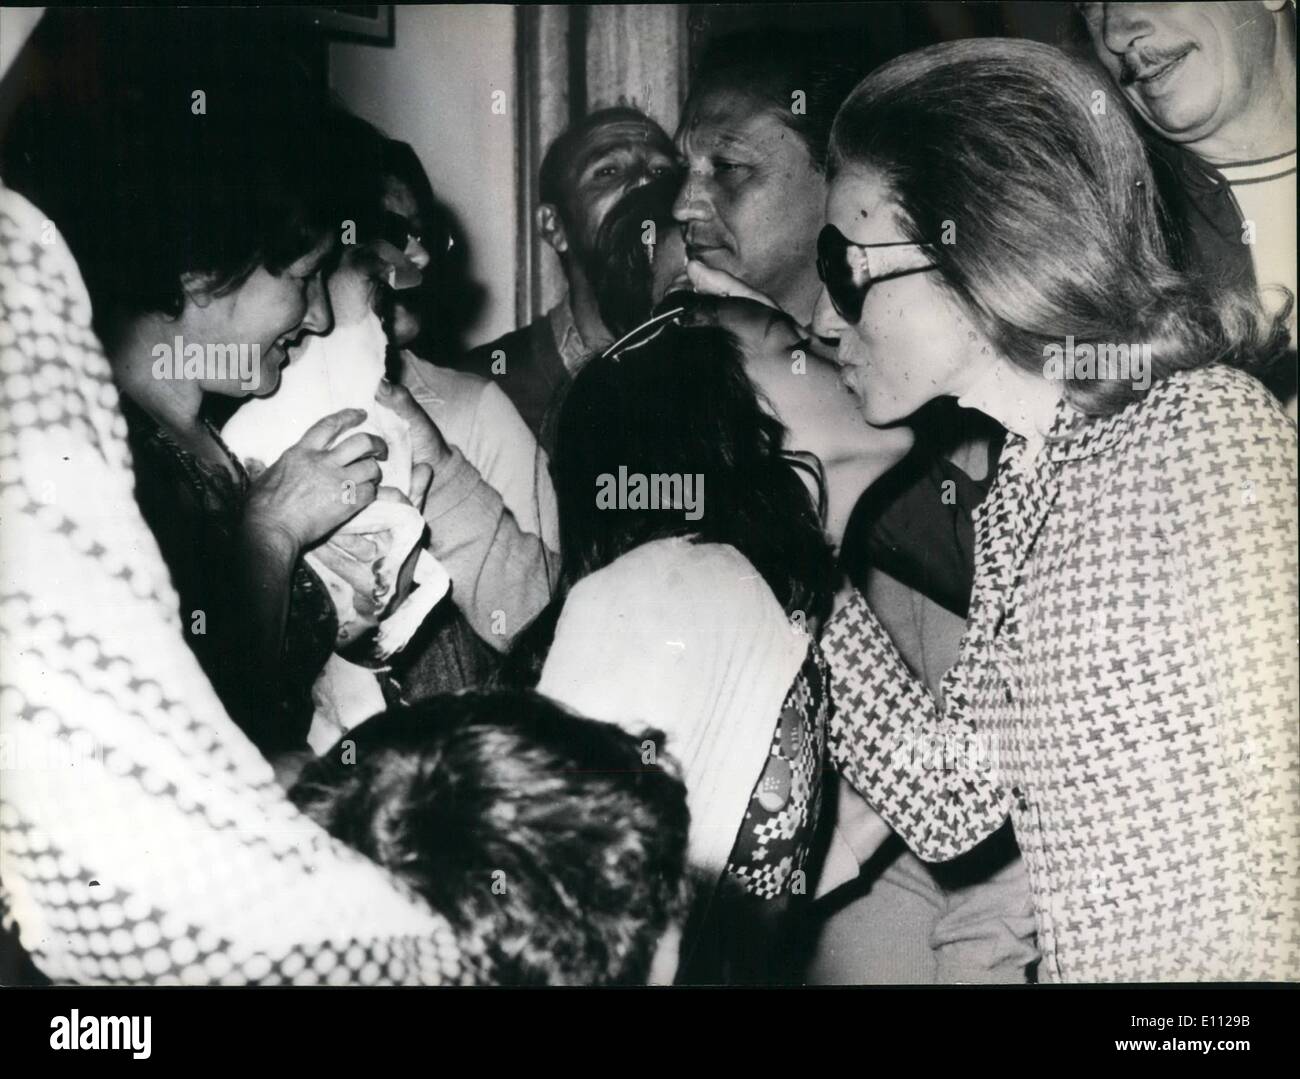 Feb. 02, 1975 - A Kiss For The President: Whilst attending a State mission at Chapadmallal, Maria Estela Martinez de Peron, the Stock Photo